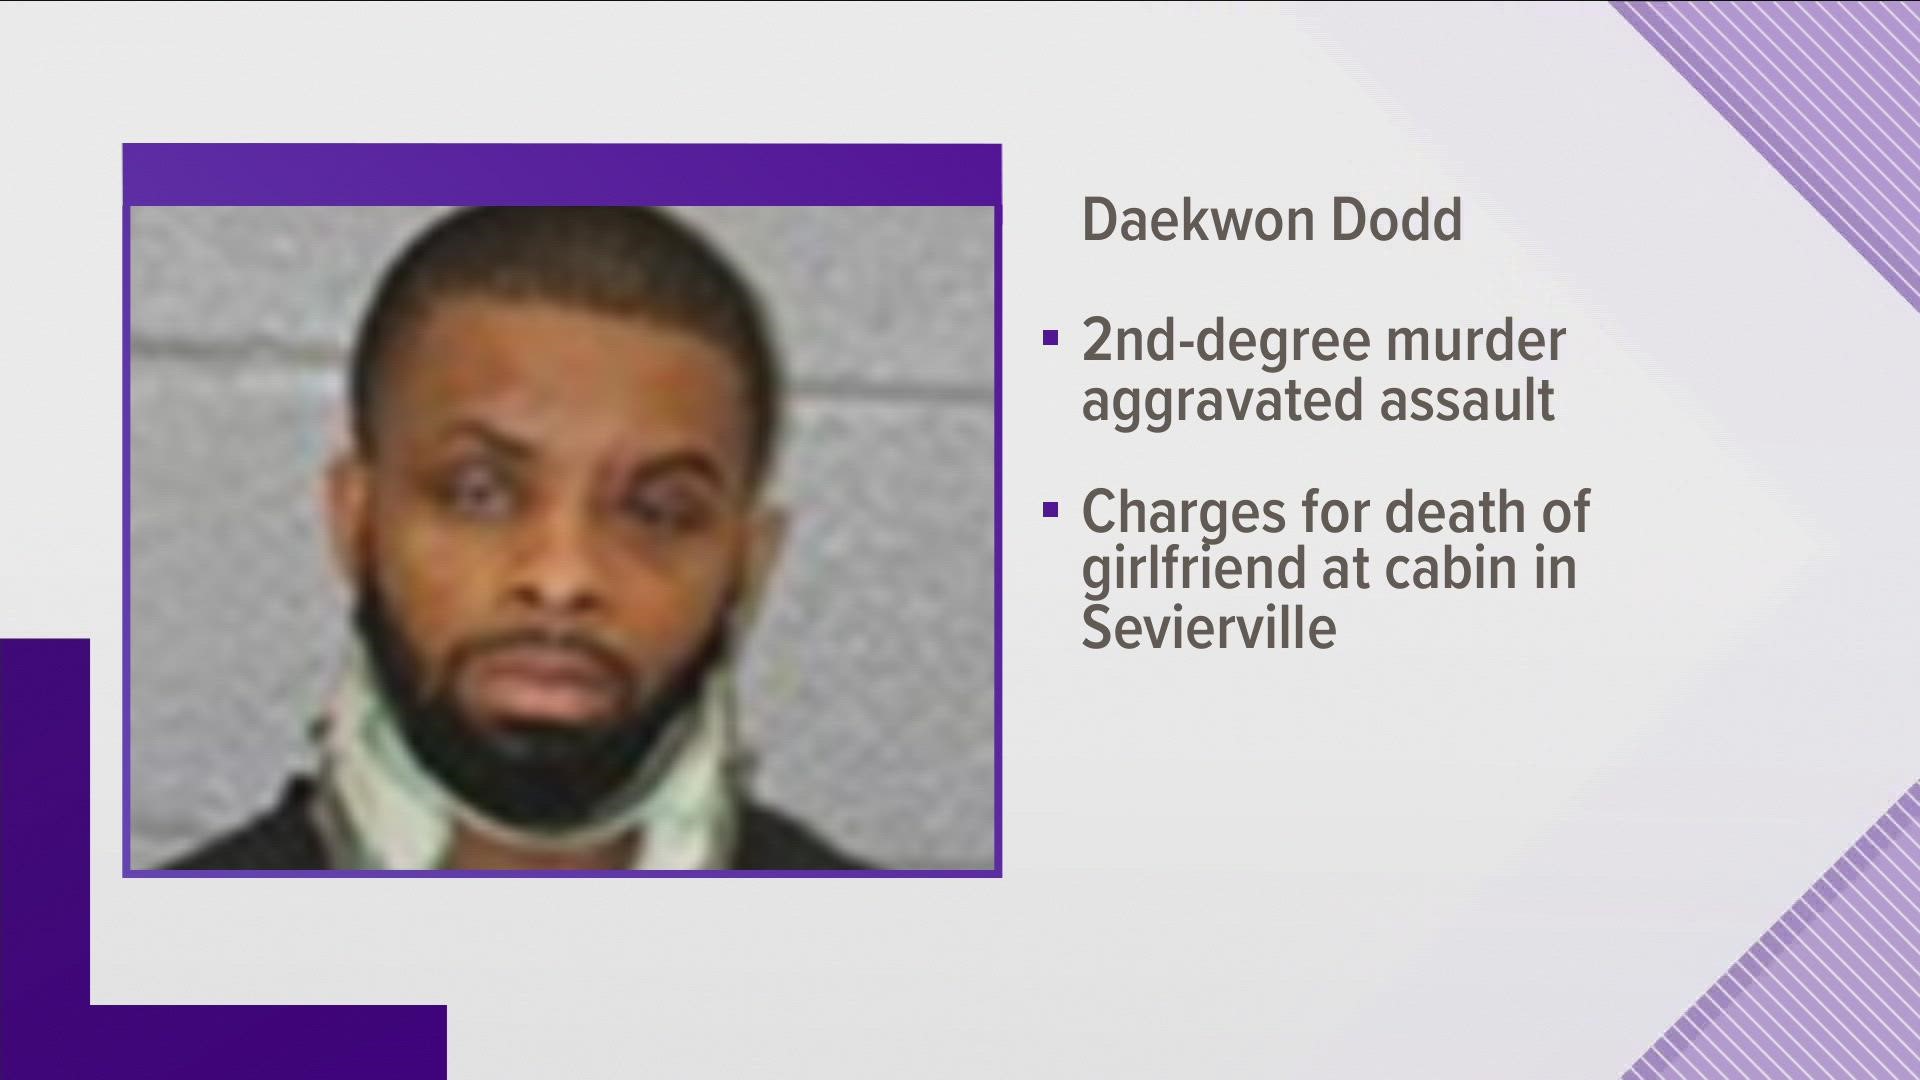 Daekwon Dodd was arrested this morning in Charlotte for second-degree murder and aggravated assault.